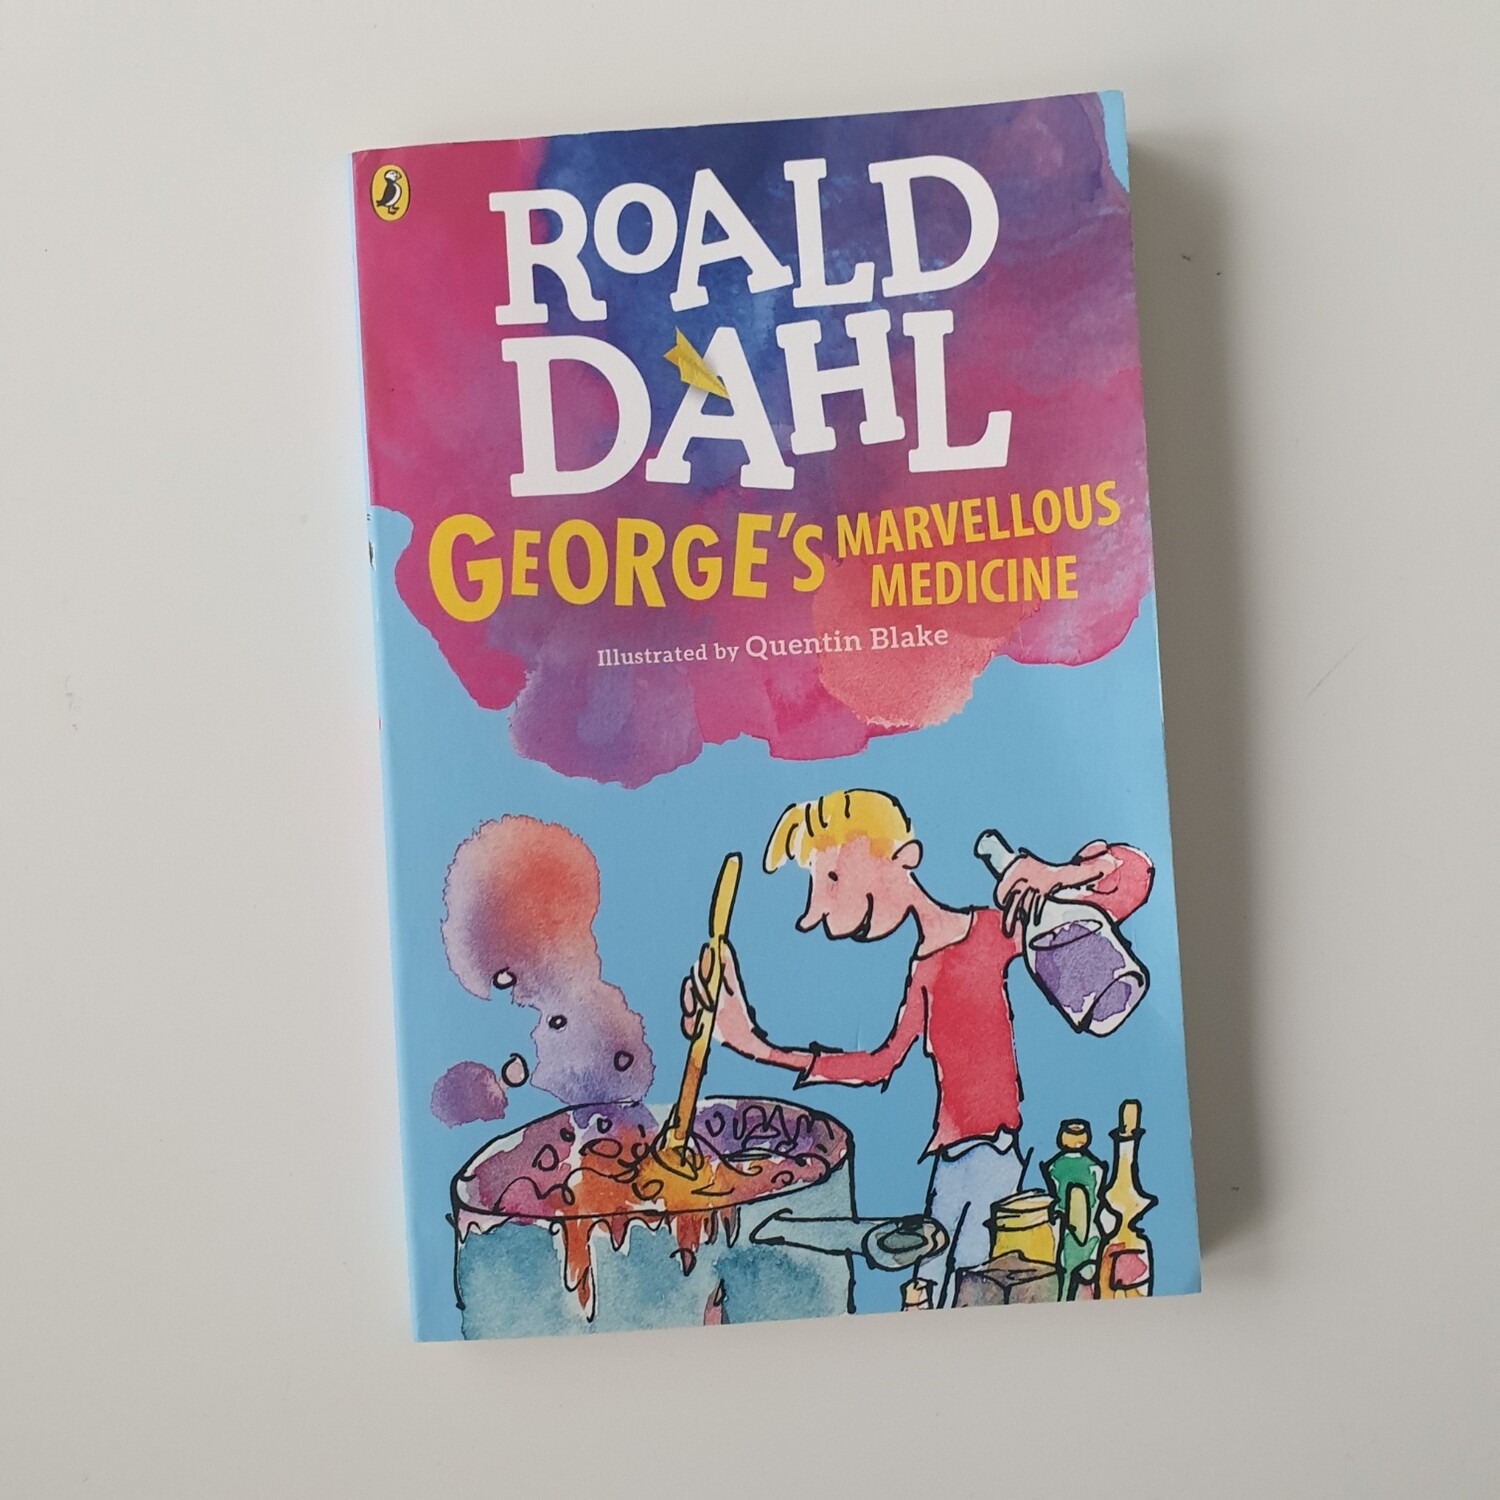 Roald Dahl George's Marvellous Medicine Notebook - made from a paperback book